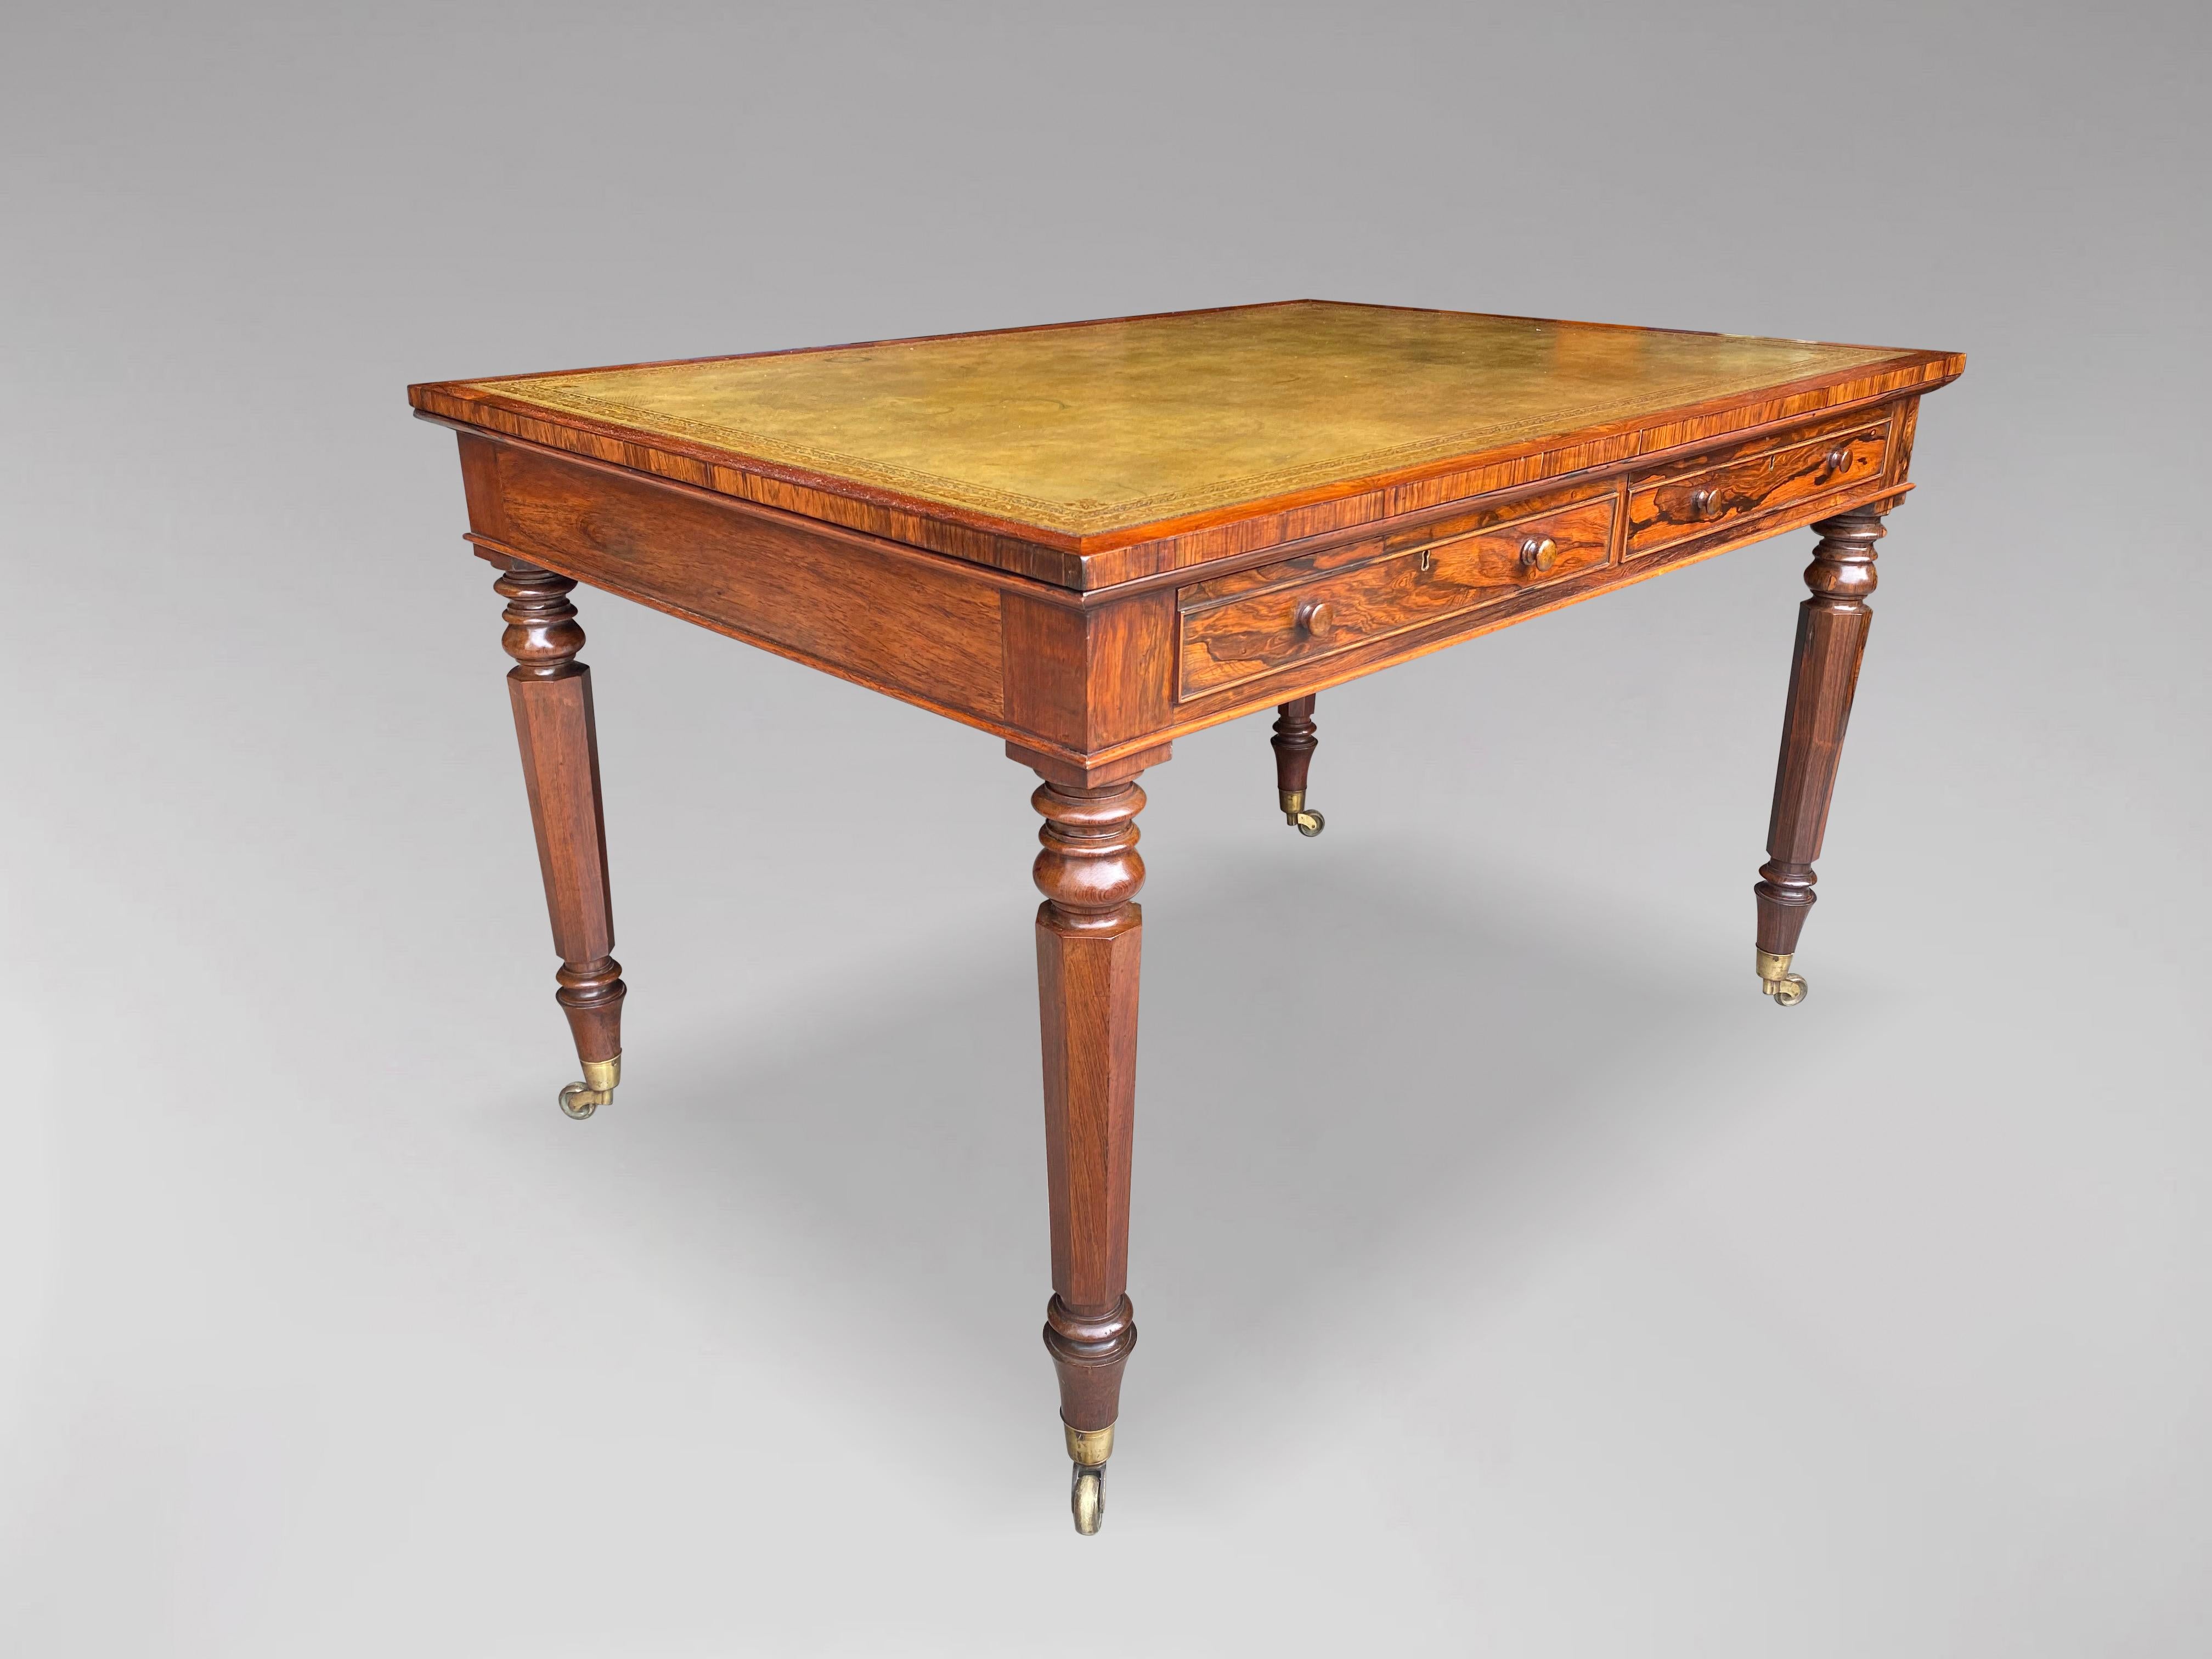 Hand-Crafted 19th Century, Regency Period Rosewood Partners Writing Table